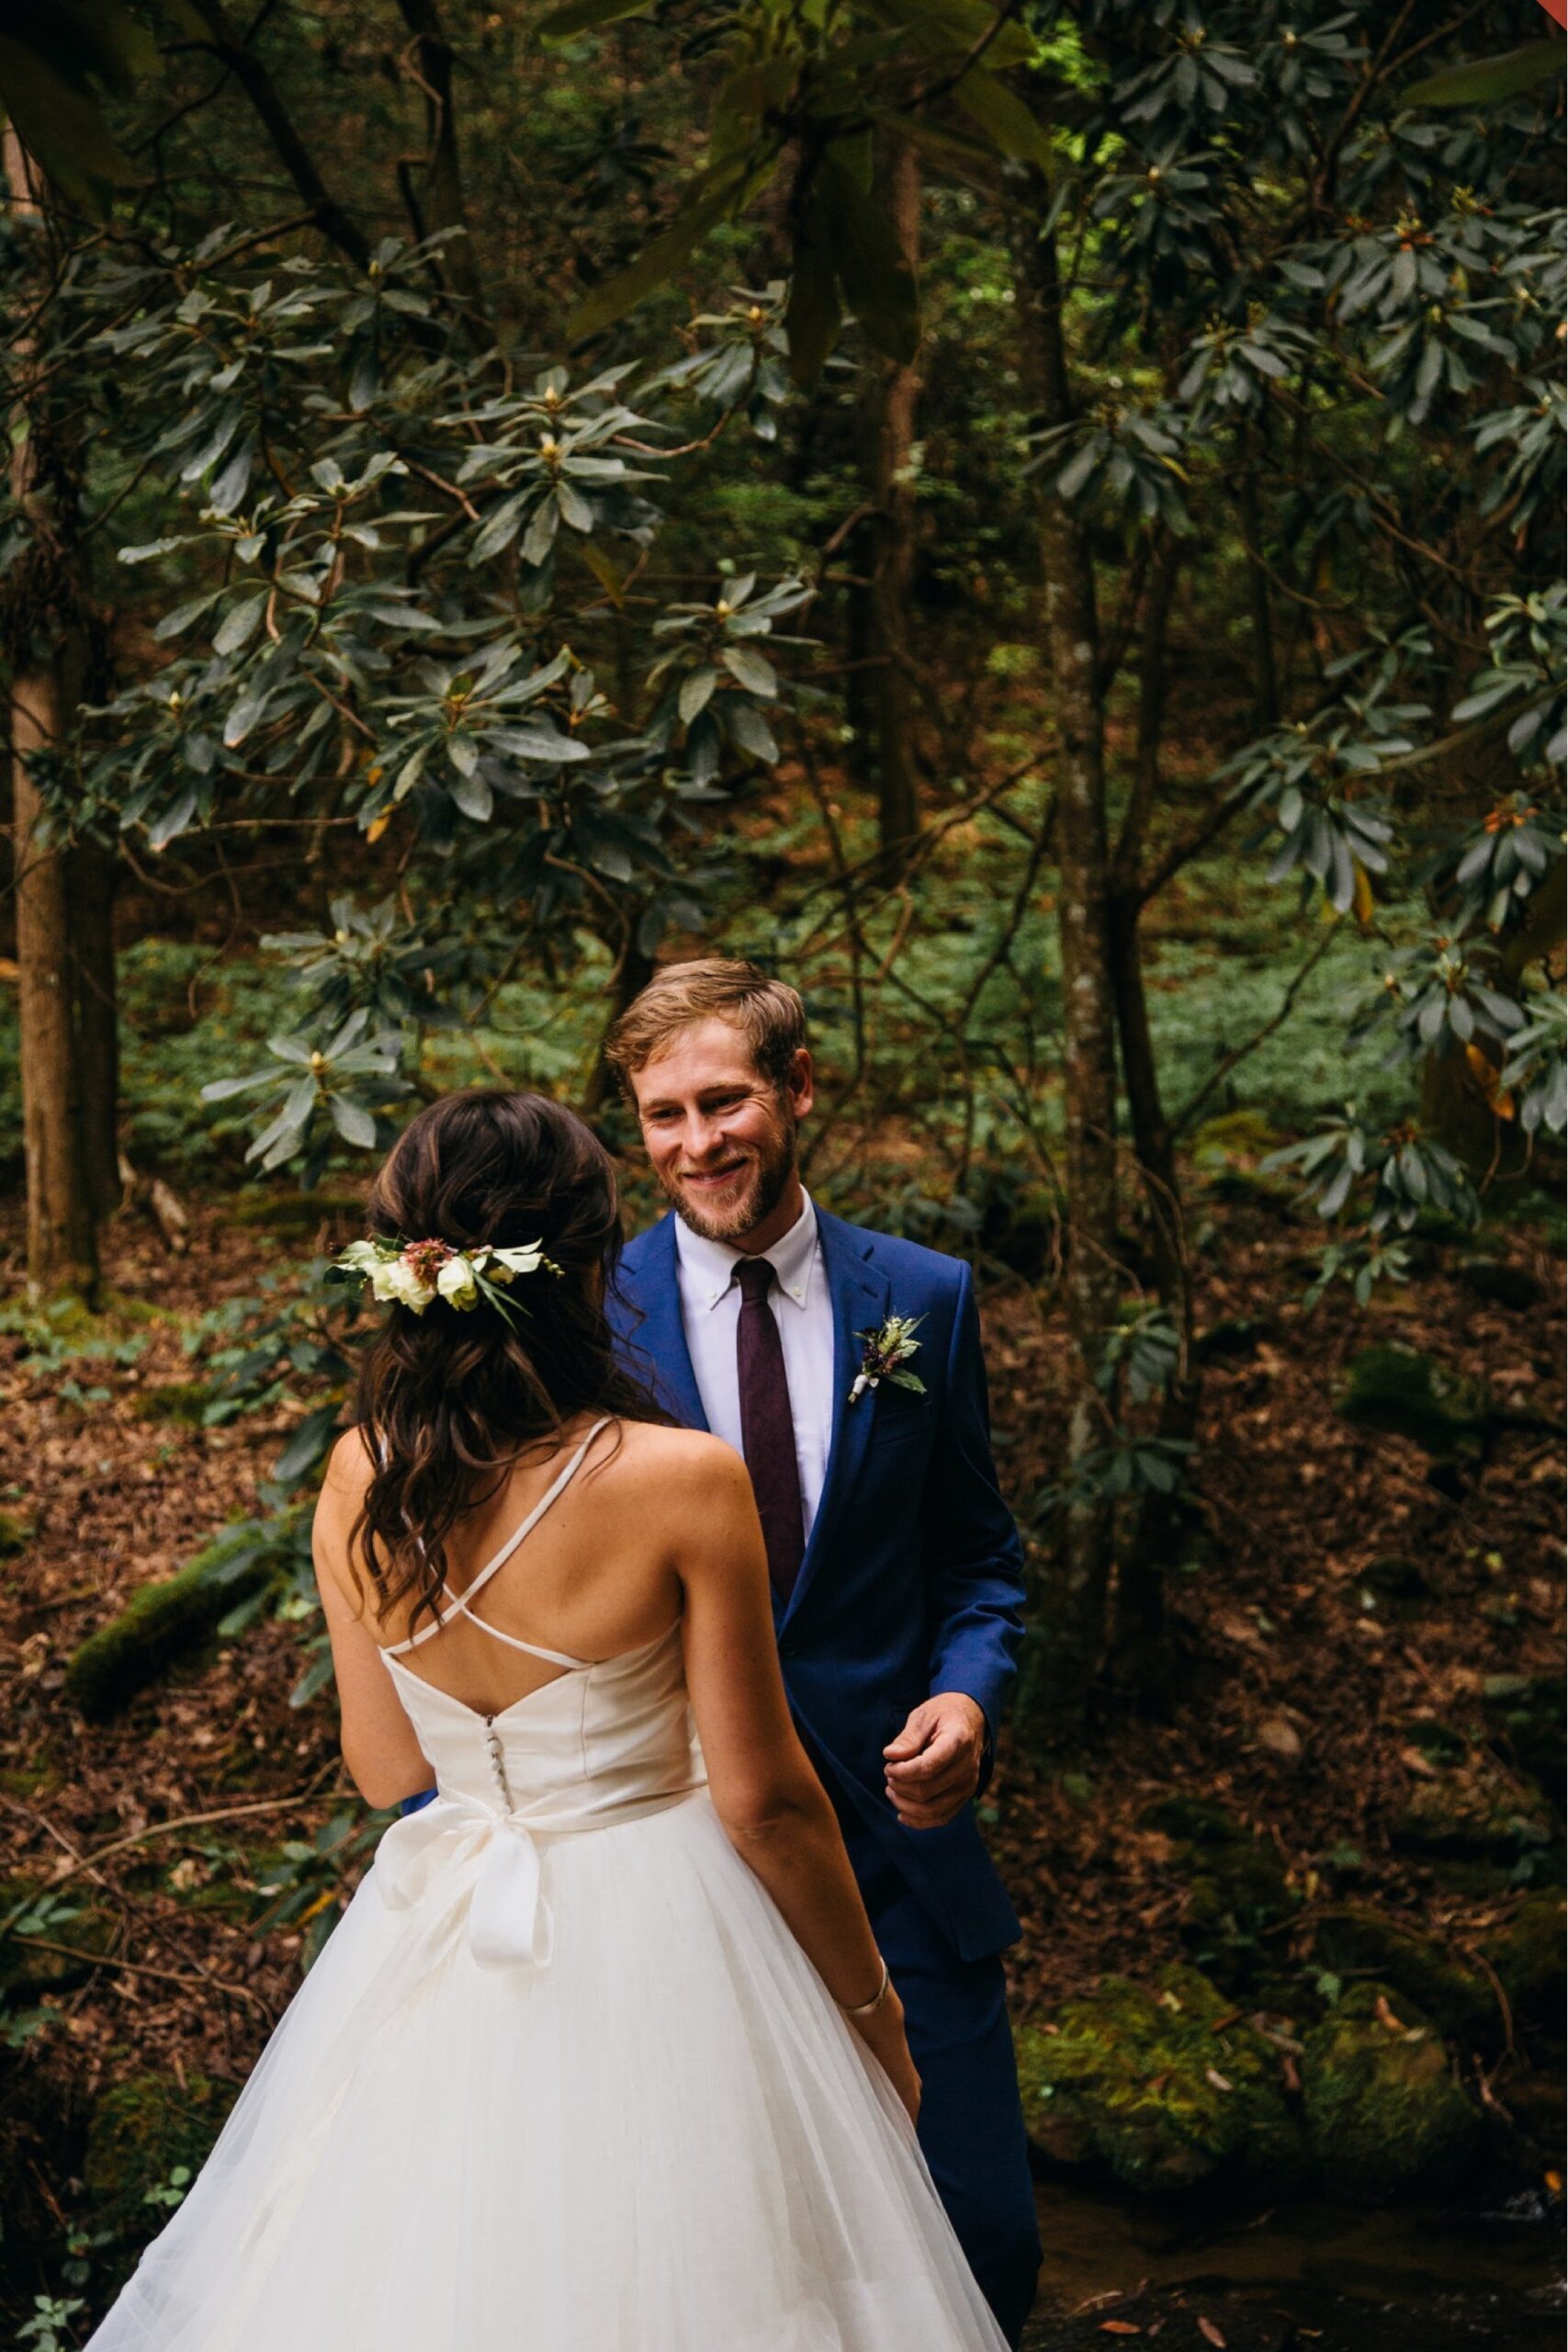 The bride and groom smile at one another during their first look in the forest.